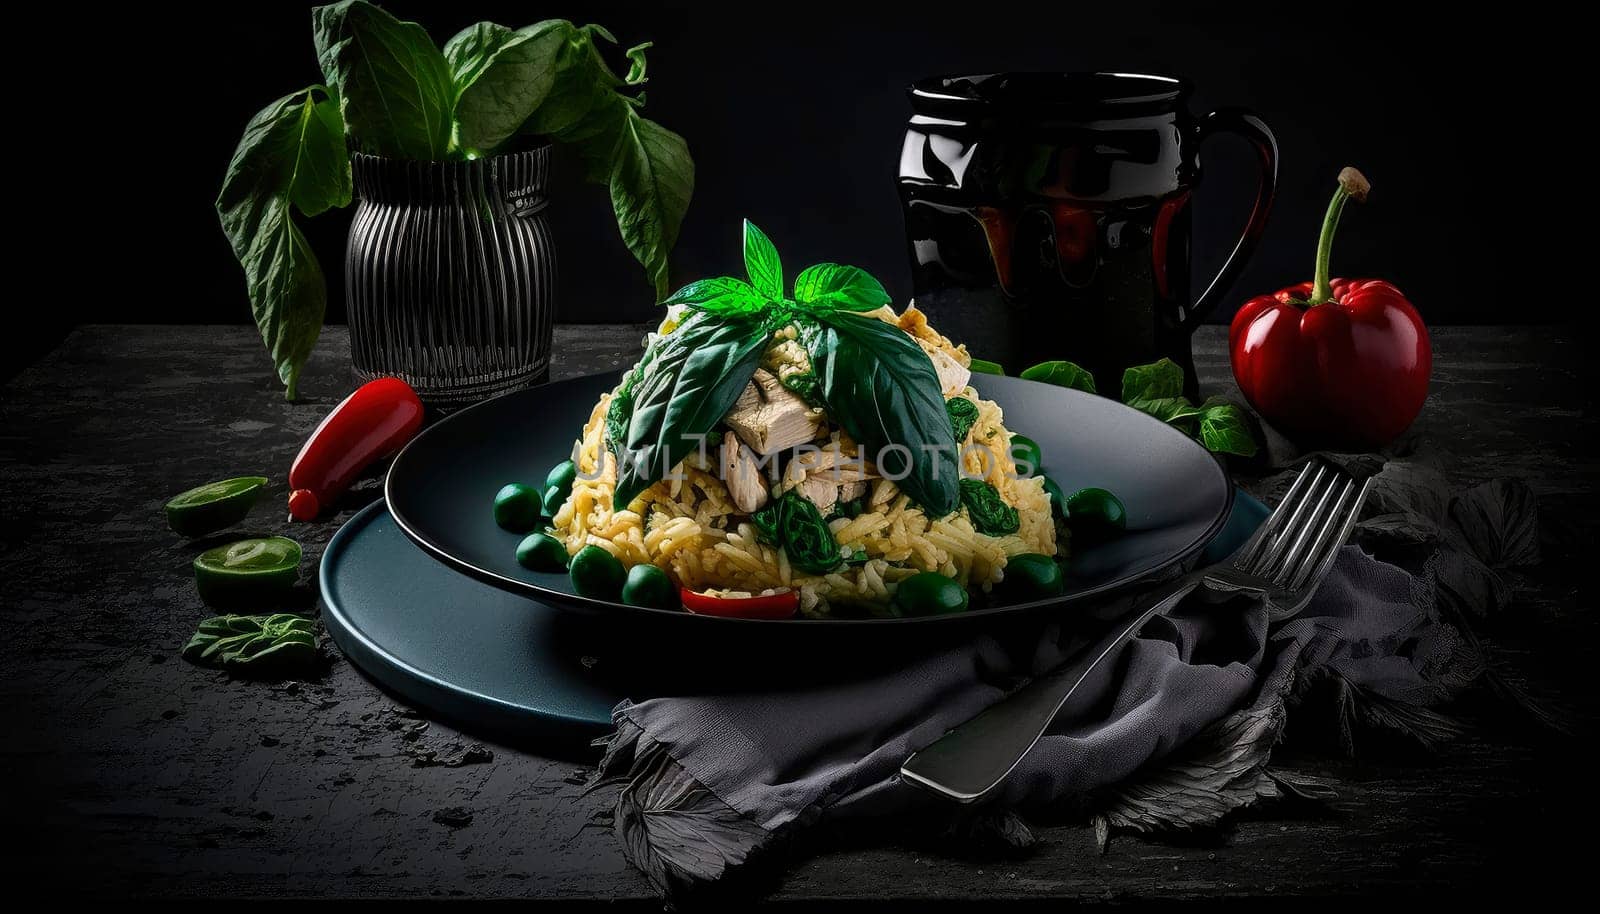 Rice with chicken risotto on a plate on a black background. by yanadjana